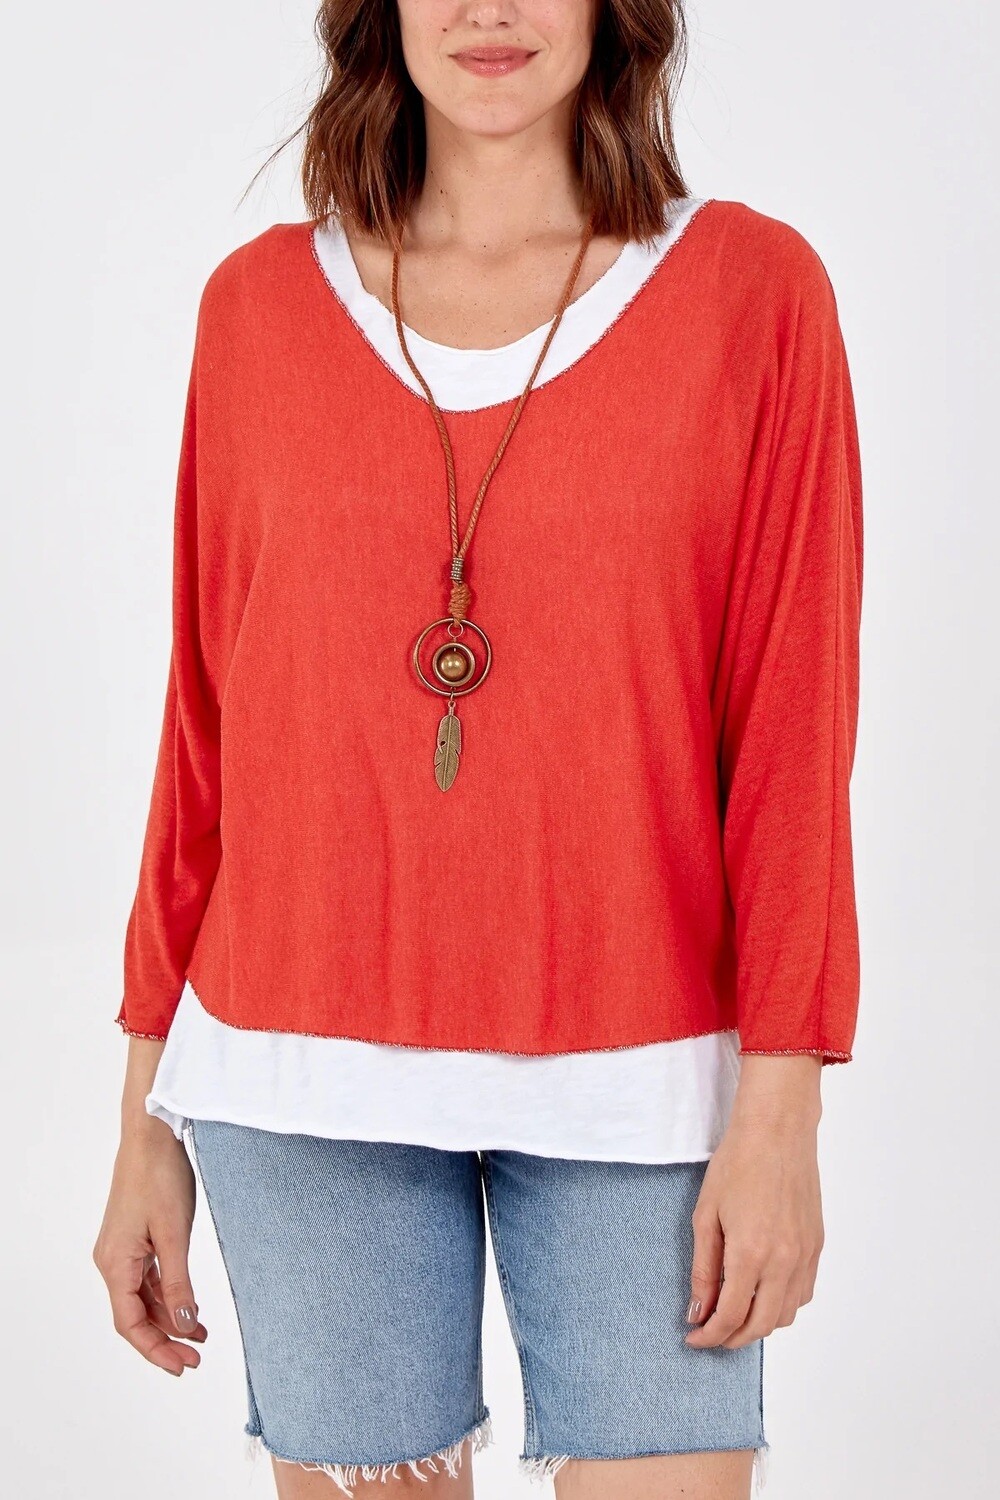 Layered Necklace Top